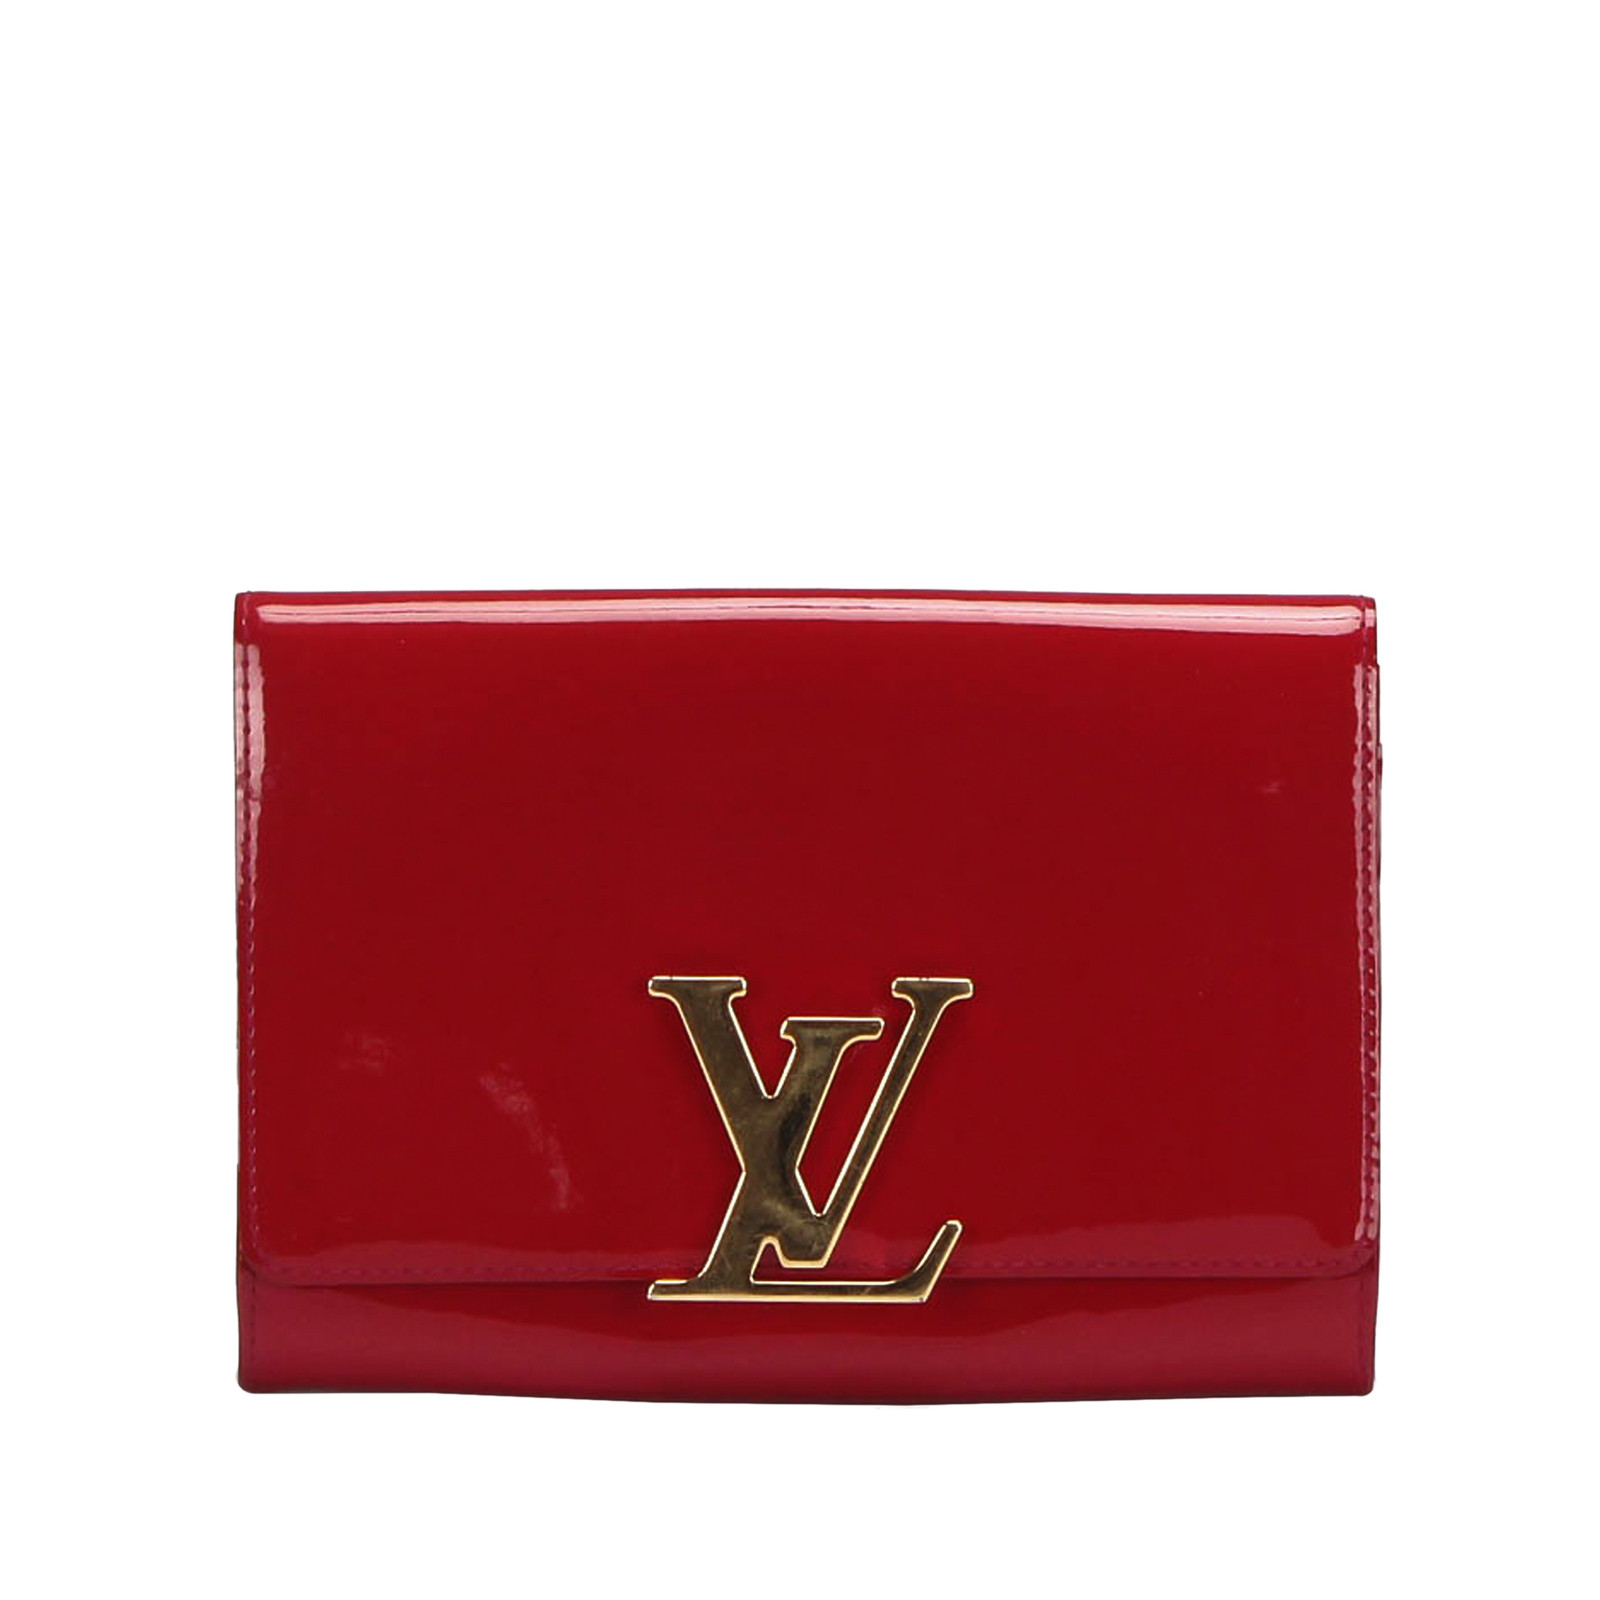 Vuitton Clutch Bag Patent leather in Red - Second Louis Vuitton Clutch Bag Patent leather in Red buy used for 1079€ (7010901)